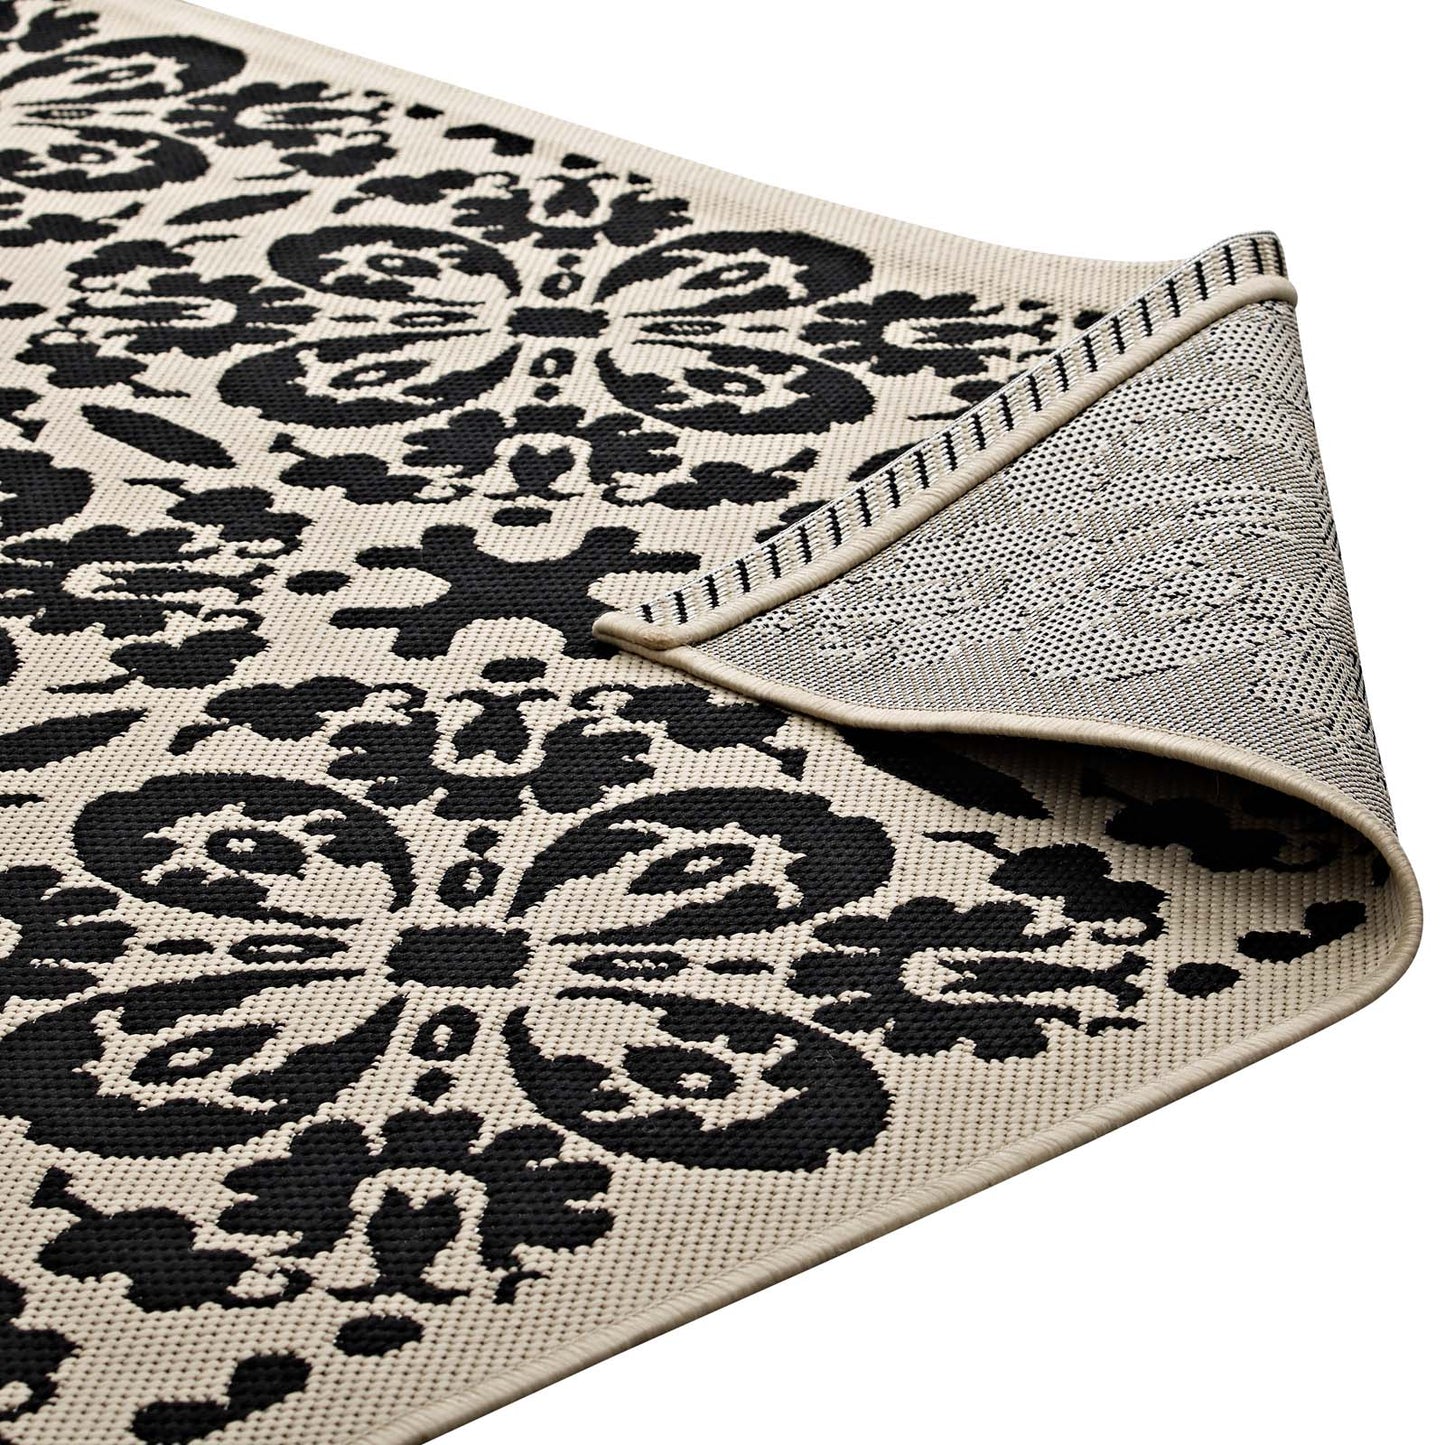 Ariana Vintage Floral Trellis 9x12 Indoor and Outdoor Area Rug Black and Beige R-1142E-912